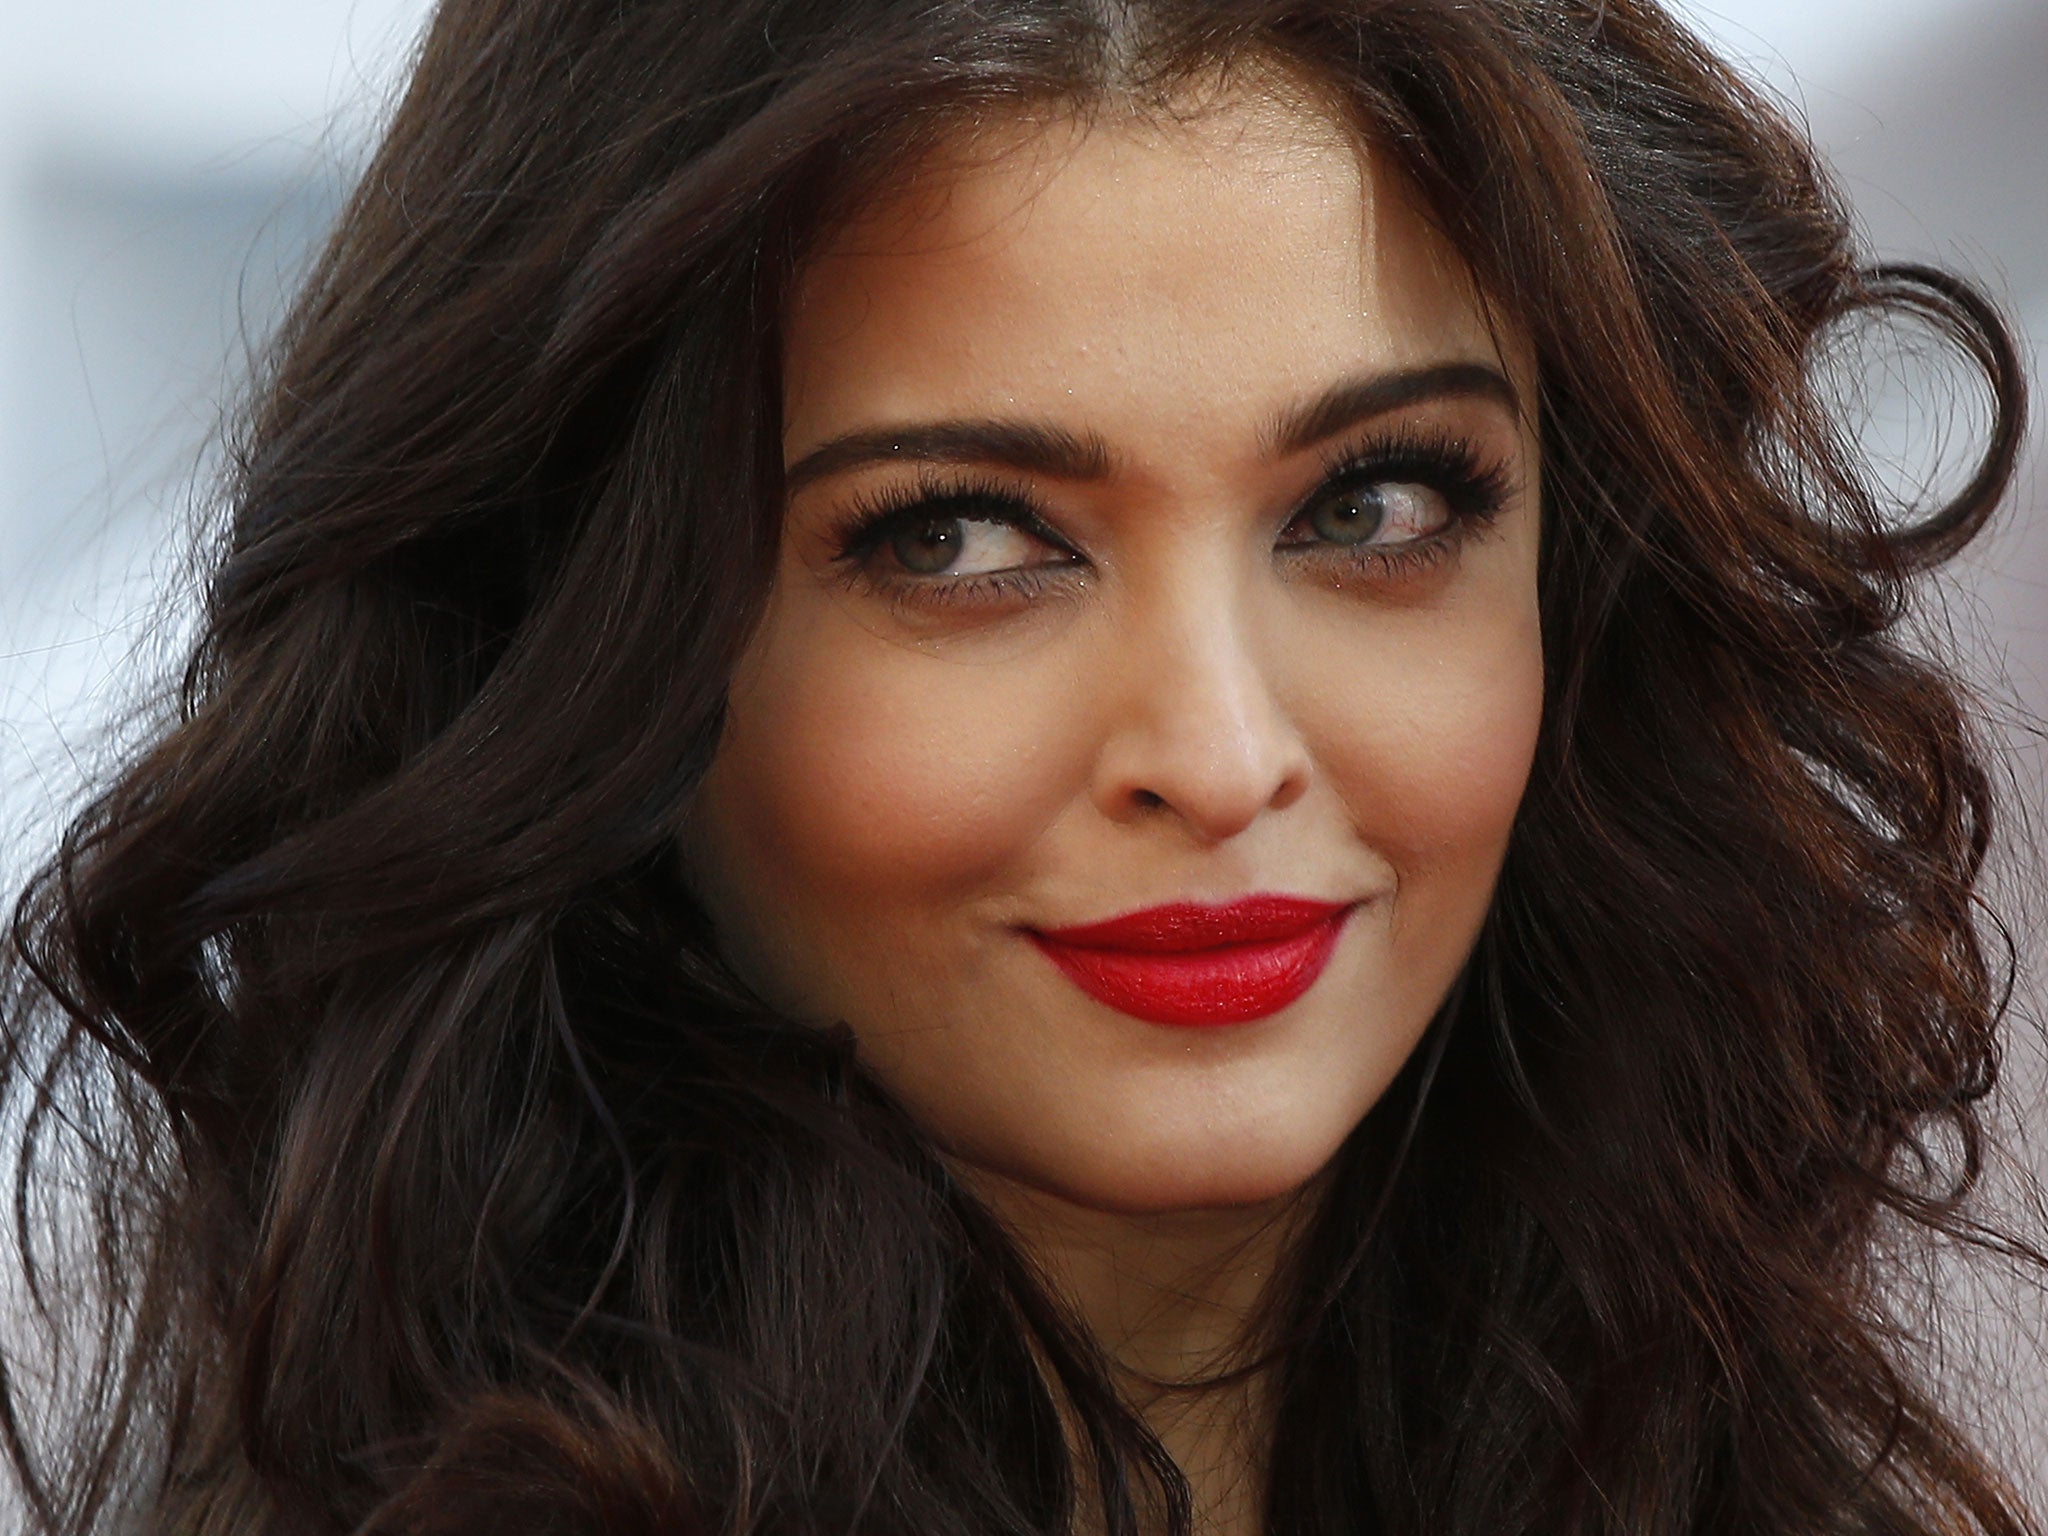 Aishwarya Rai Sex Videos - Aishwarya Rai Bachchan 'racist' jewellery advert pulled after criticism it  promoted child slavery | The Independent | The Independent